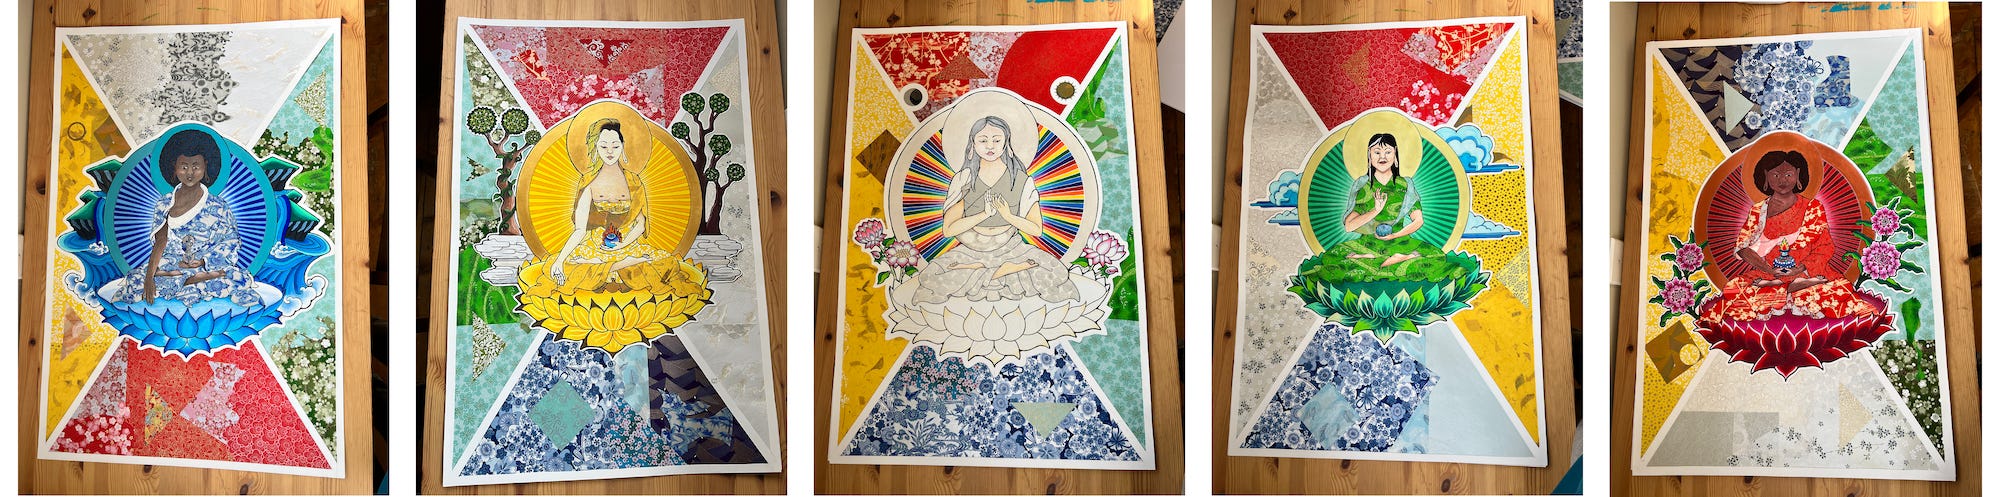 Left to right, photographs of five colourful mixed-media art pieces representing the Five Buddha Families in non-male embodiments. From left to right they are Akshobya (Vajra family), Ratnasambavha (Ratna family), Vairocana (Buddha family), Amoghasiddhi (Karma family) and Amitabha (Padma family) 